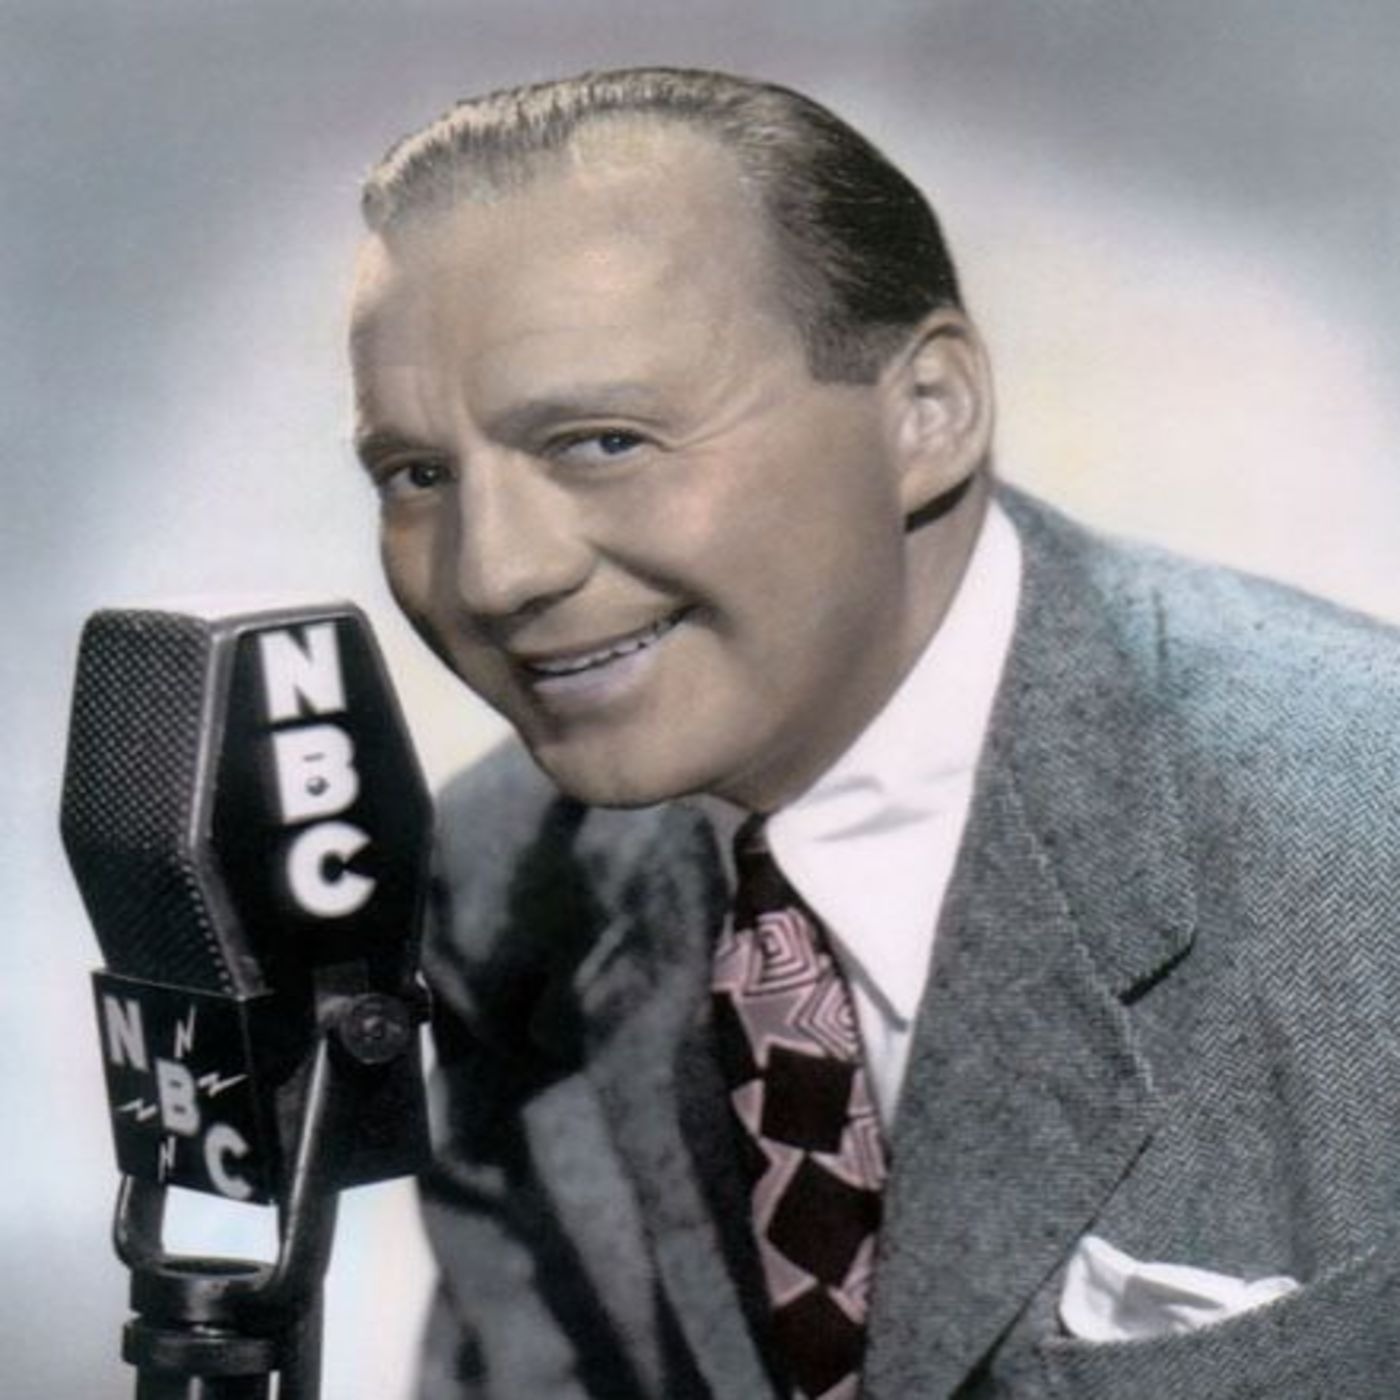 Jack Benny 51-05-13 (770) Jack Prepares to Go to New York to Do His 4th TV Show